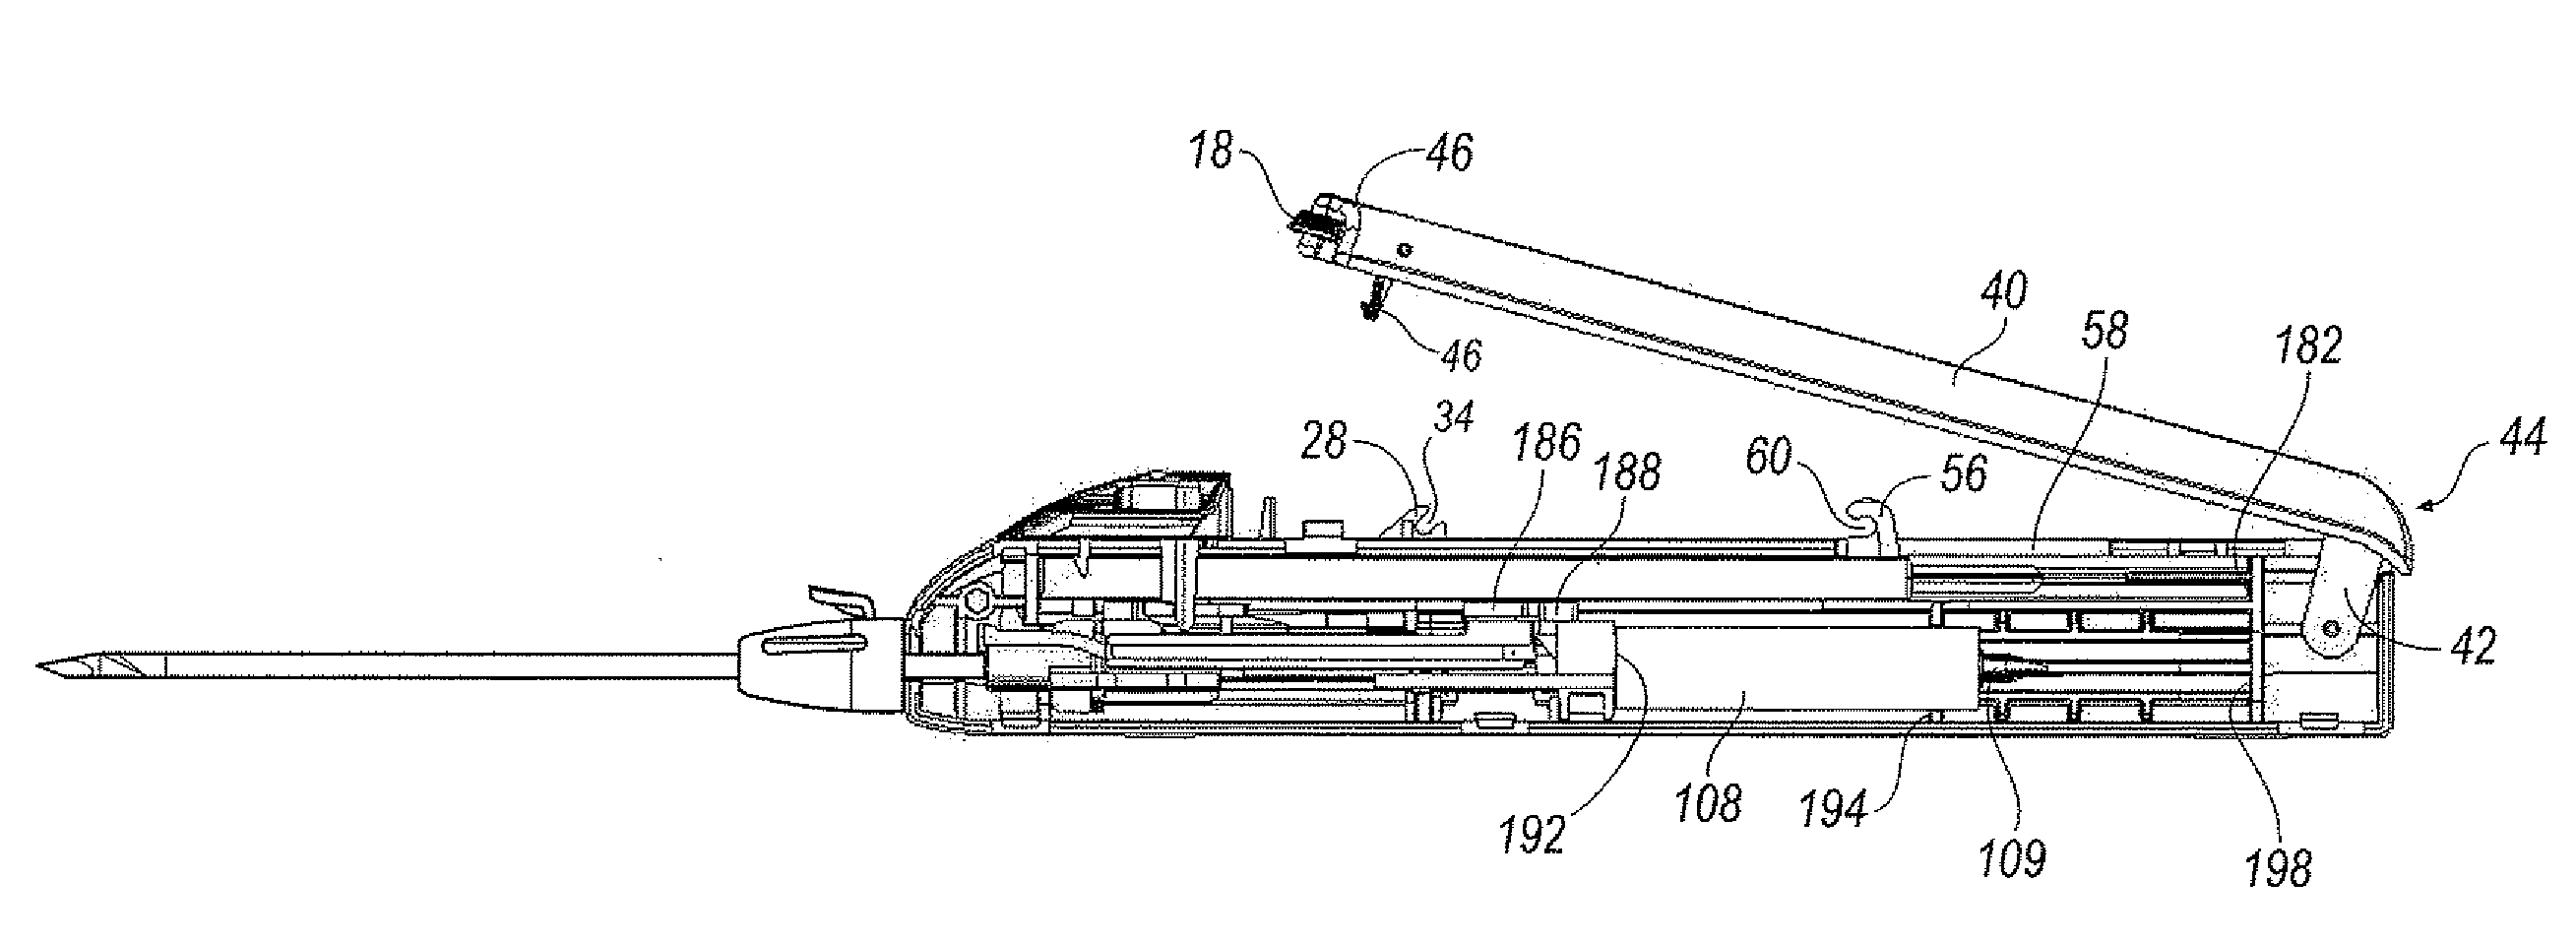 Vacuum assisted biopsy device